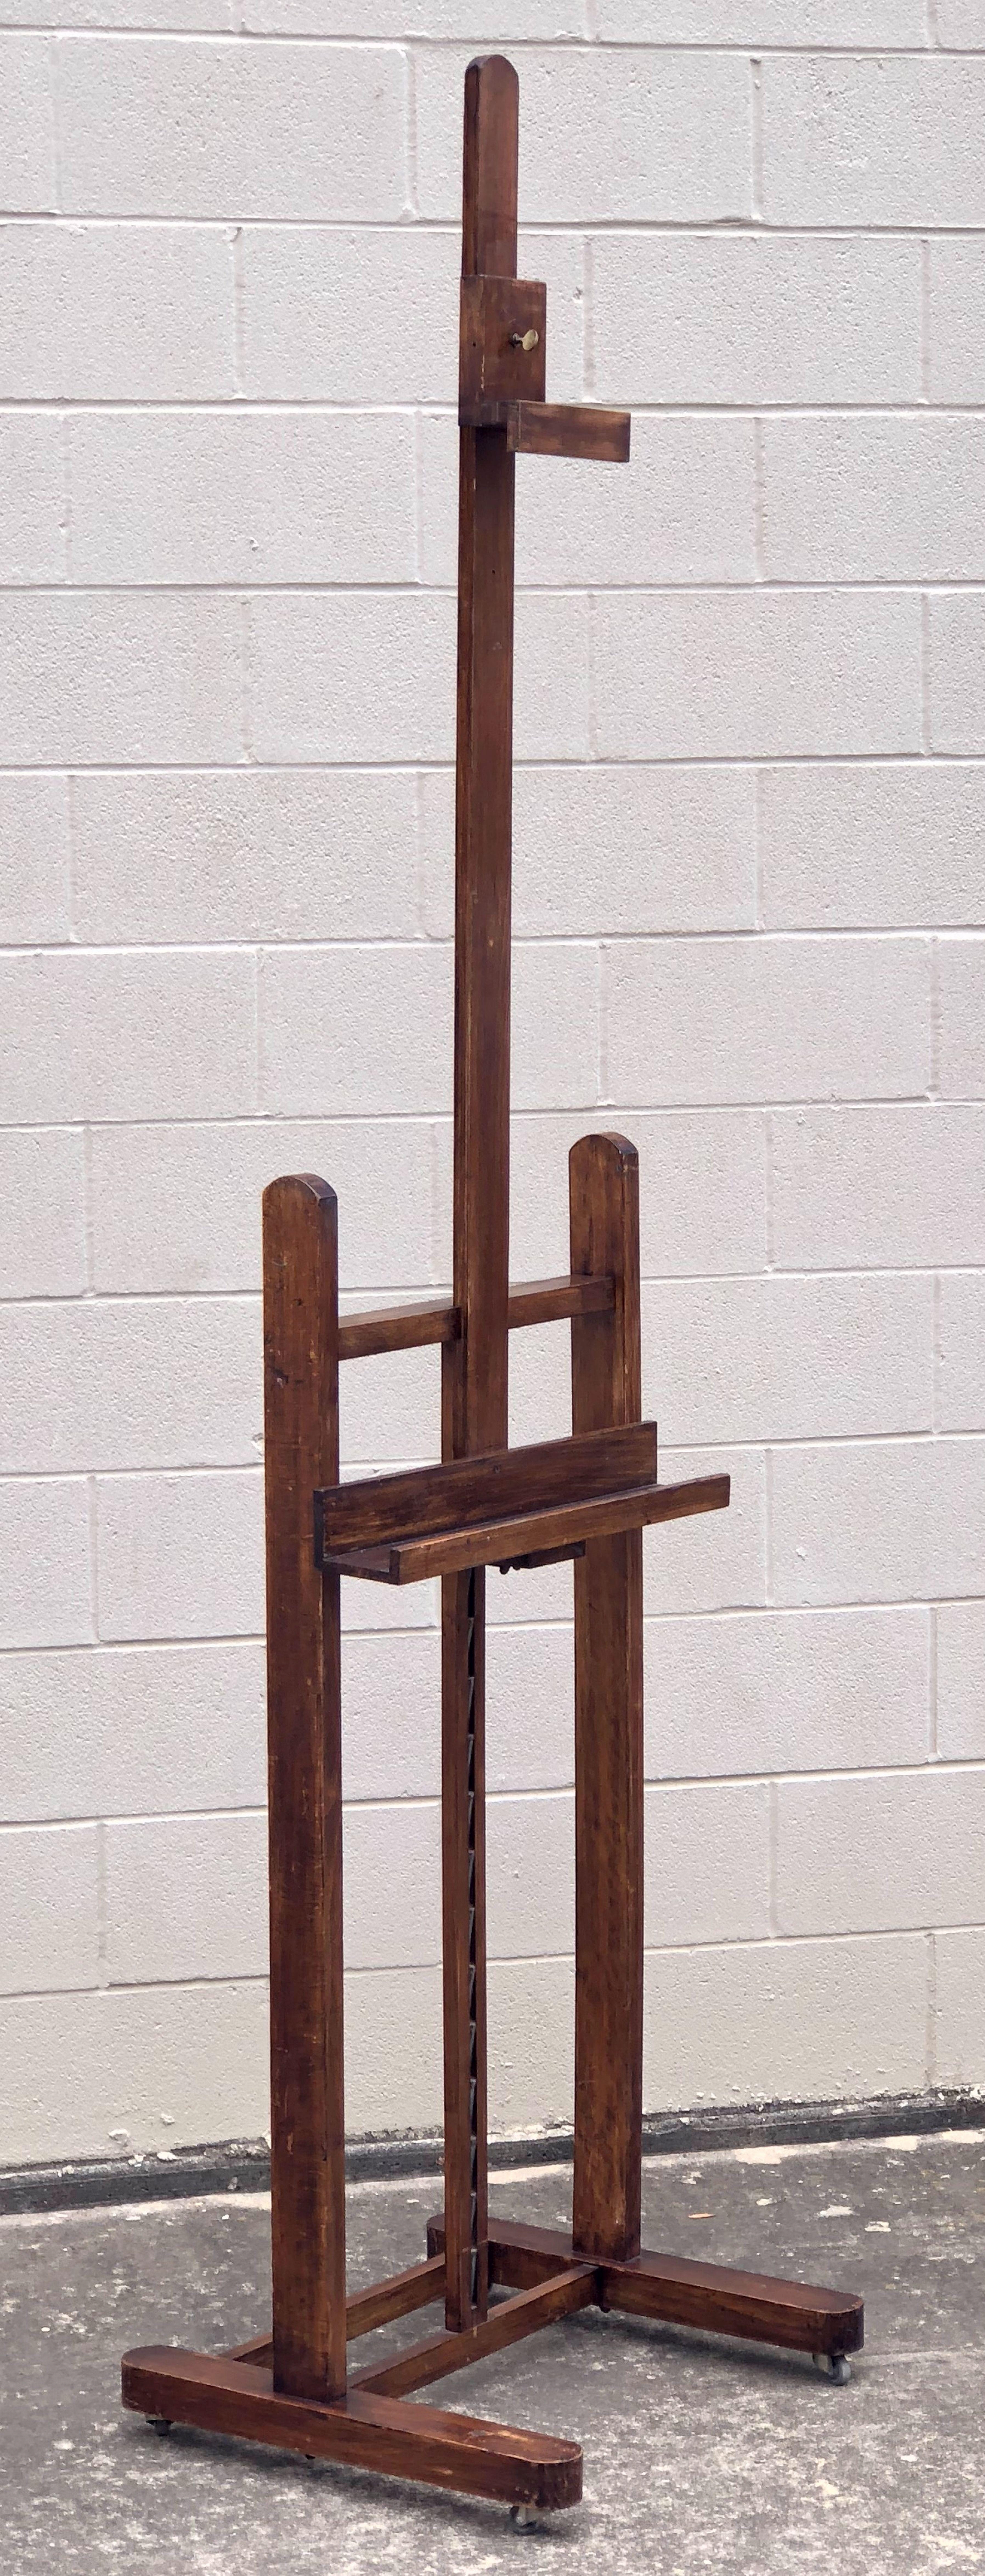 Large English Artist's Display or Floor Easel with Adjustable Tray 1